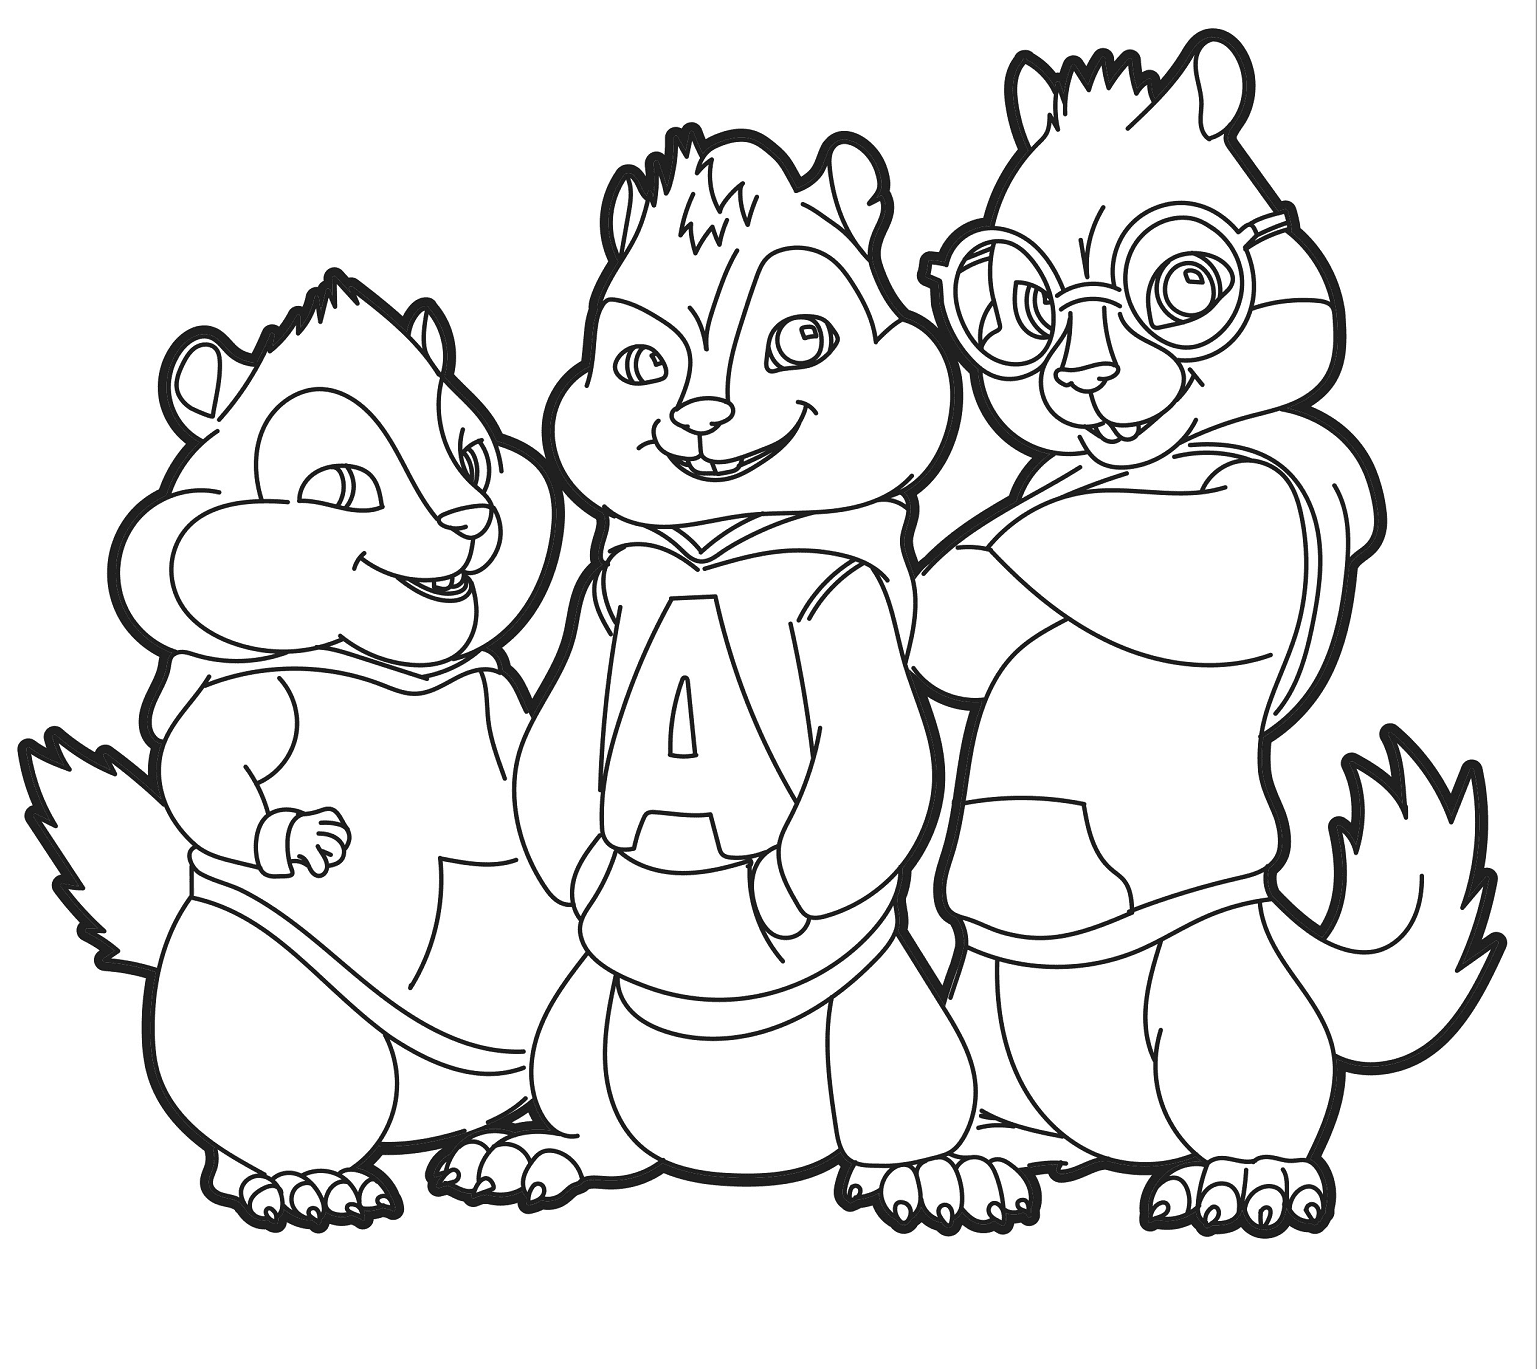 The Chipmunks Coloring Pages